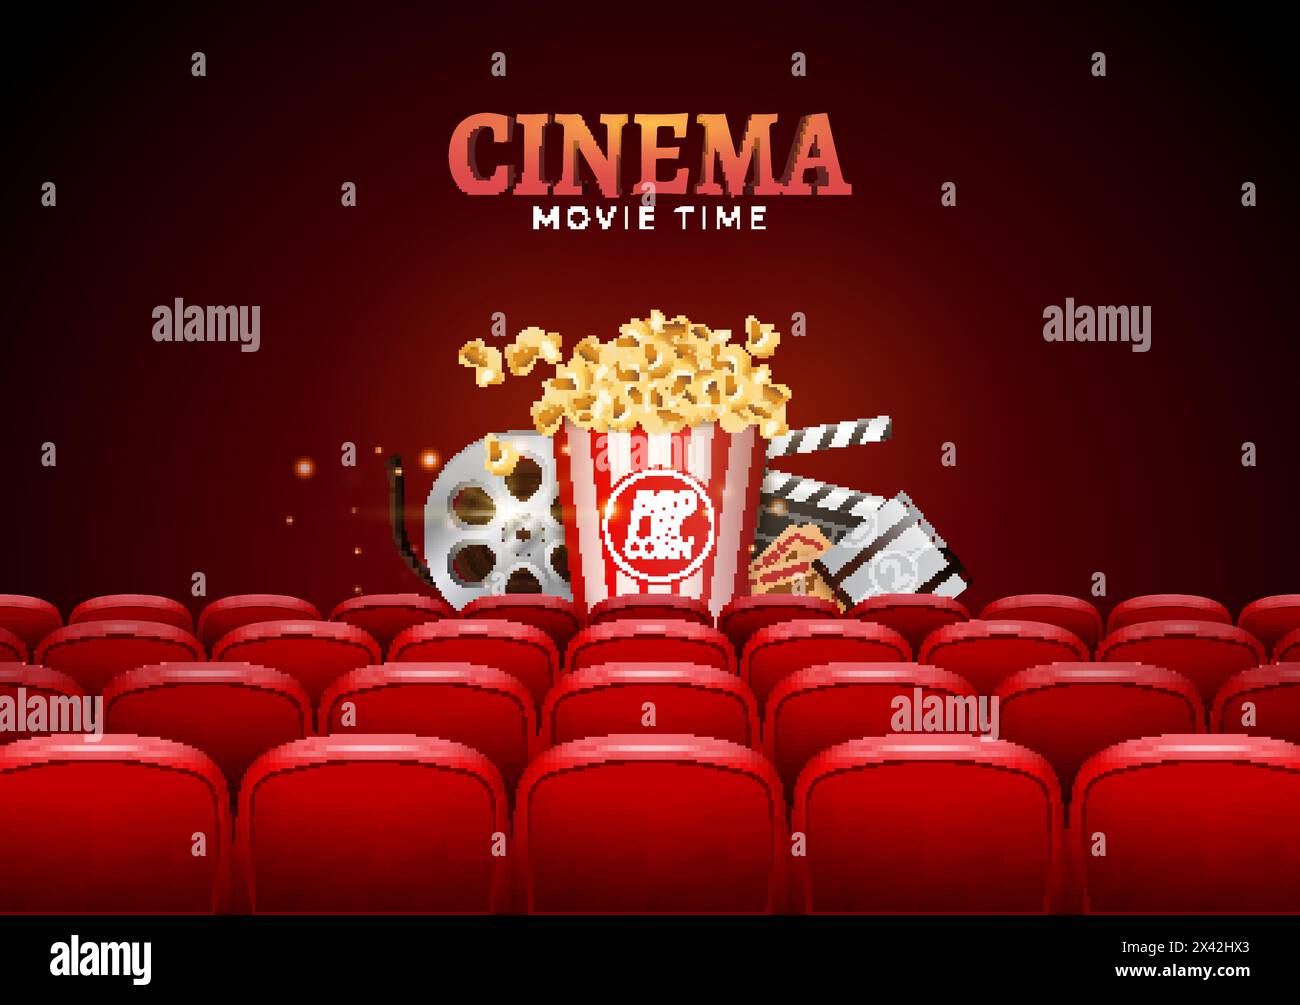 Movie cinema premiere poster design. Vector template banner for show with seats, popcorn, tickets. Stock Vector